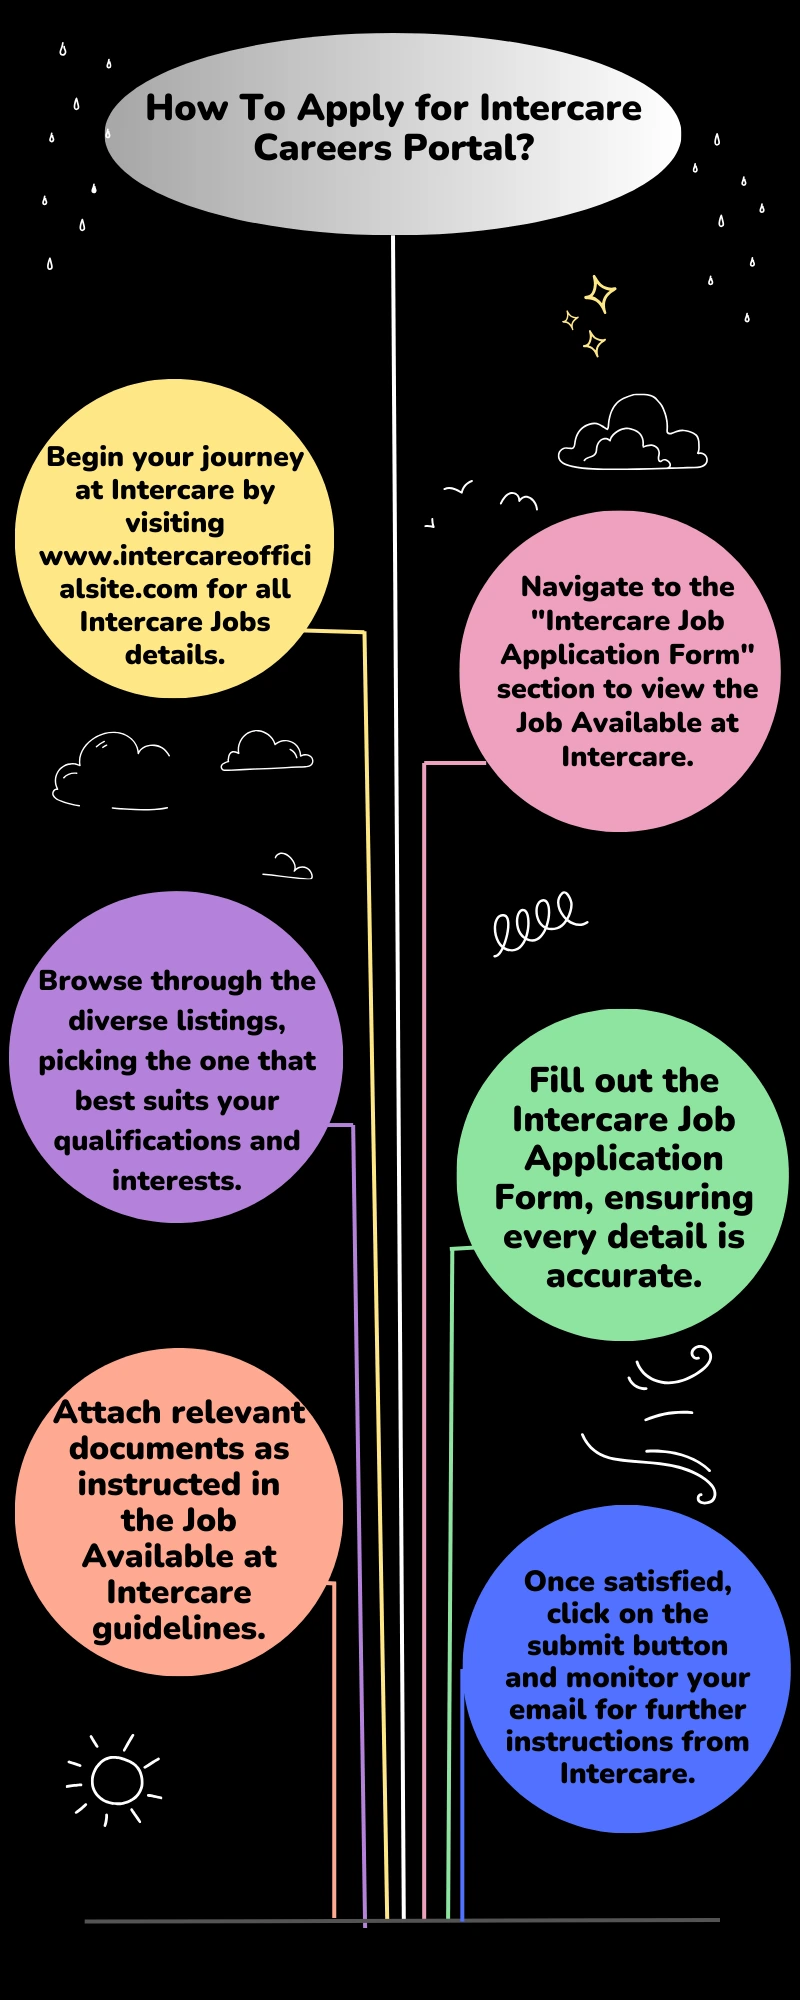 How To Apply for Intercare Careers Portal?